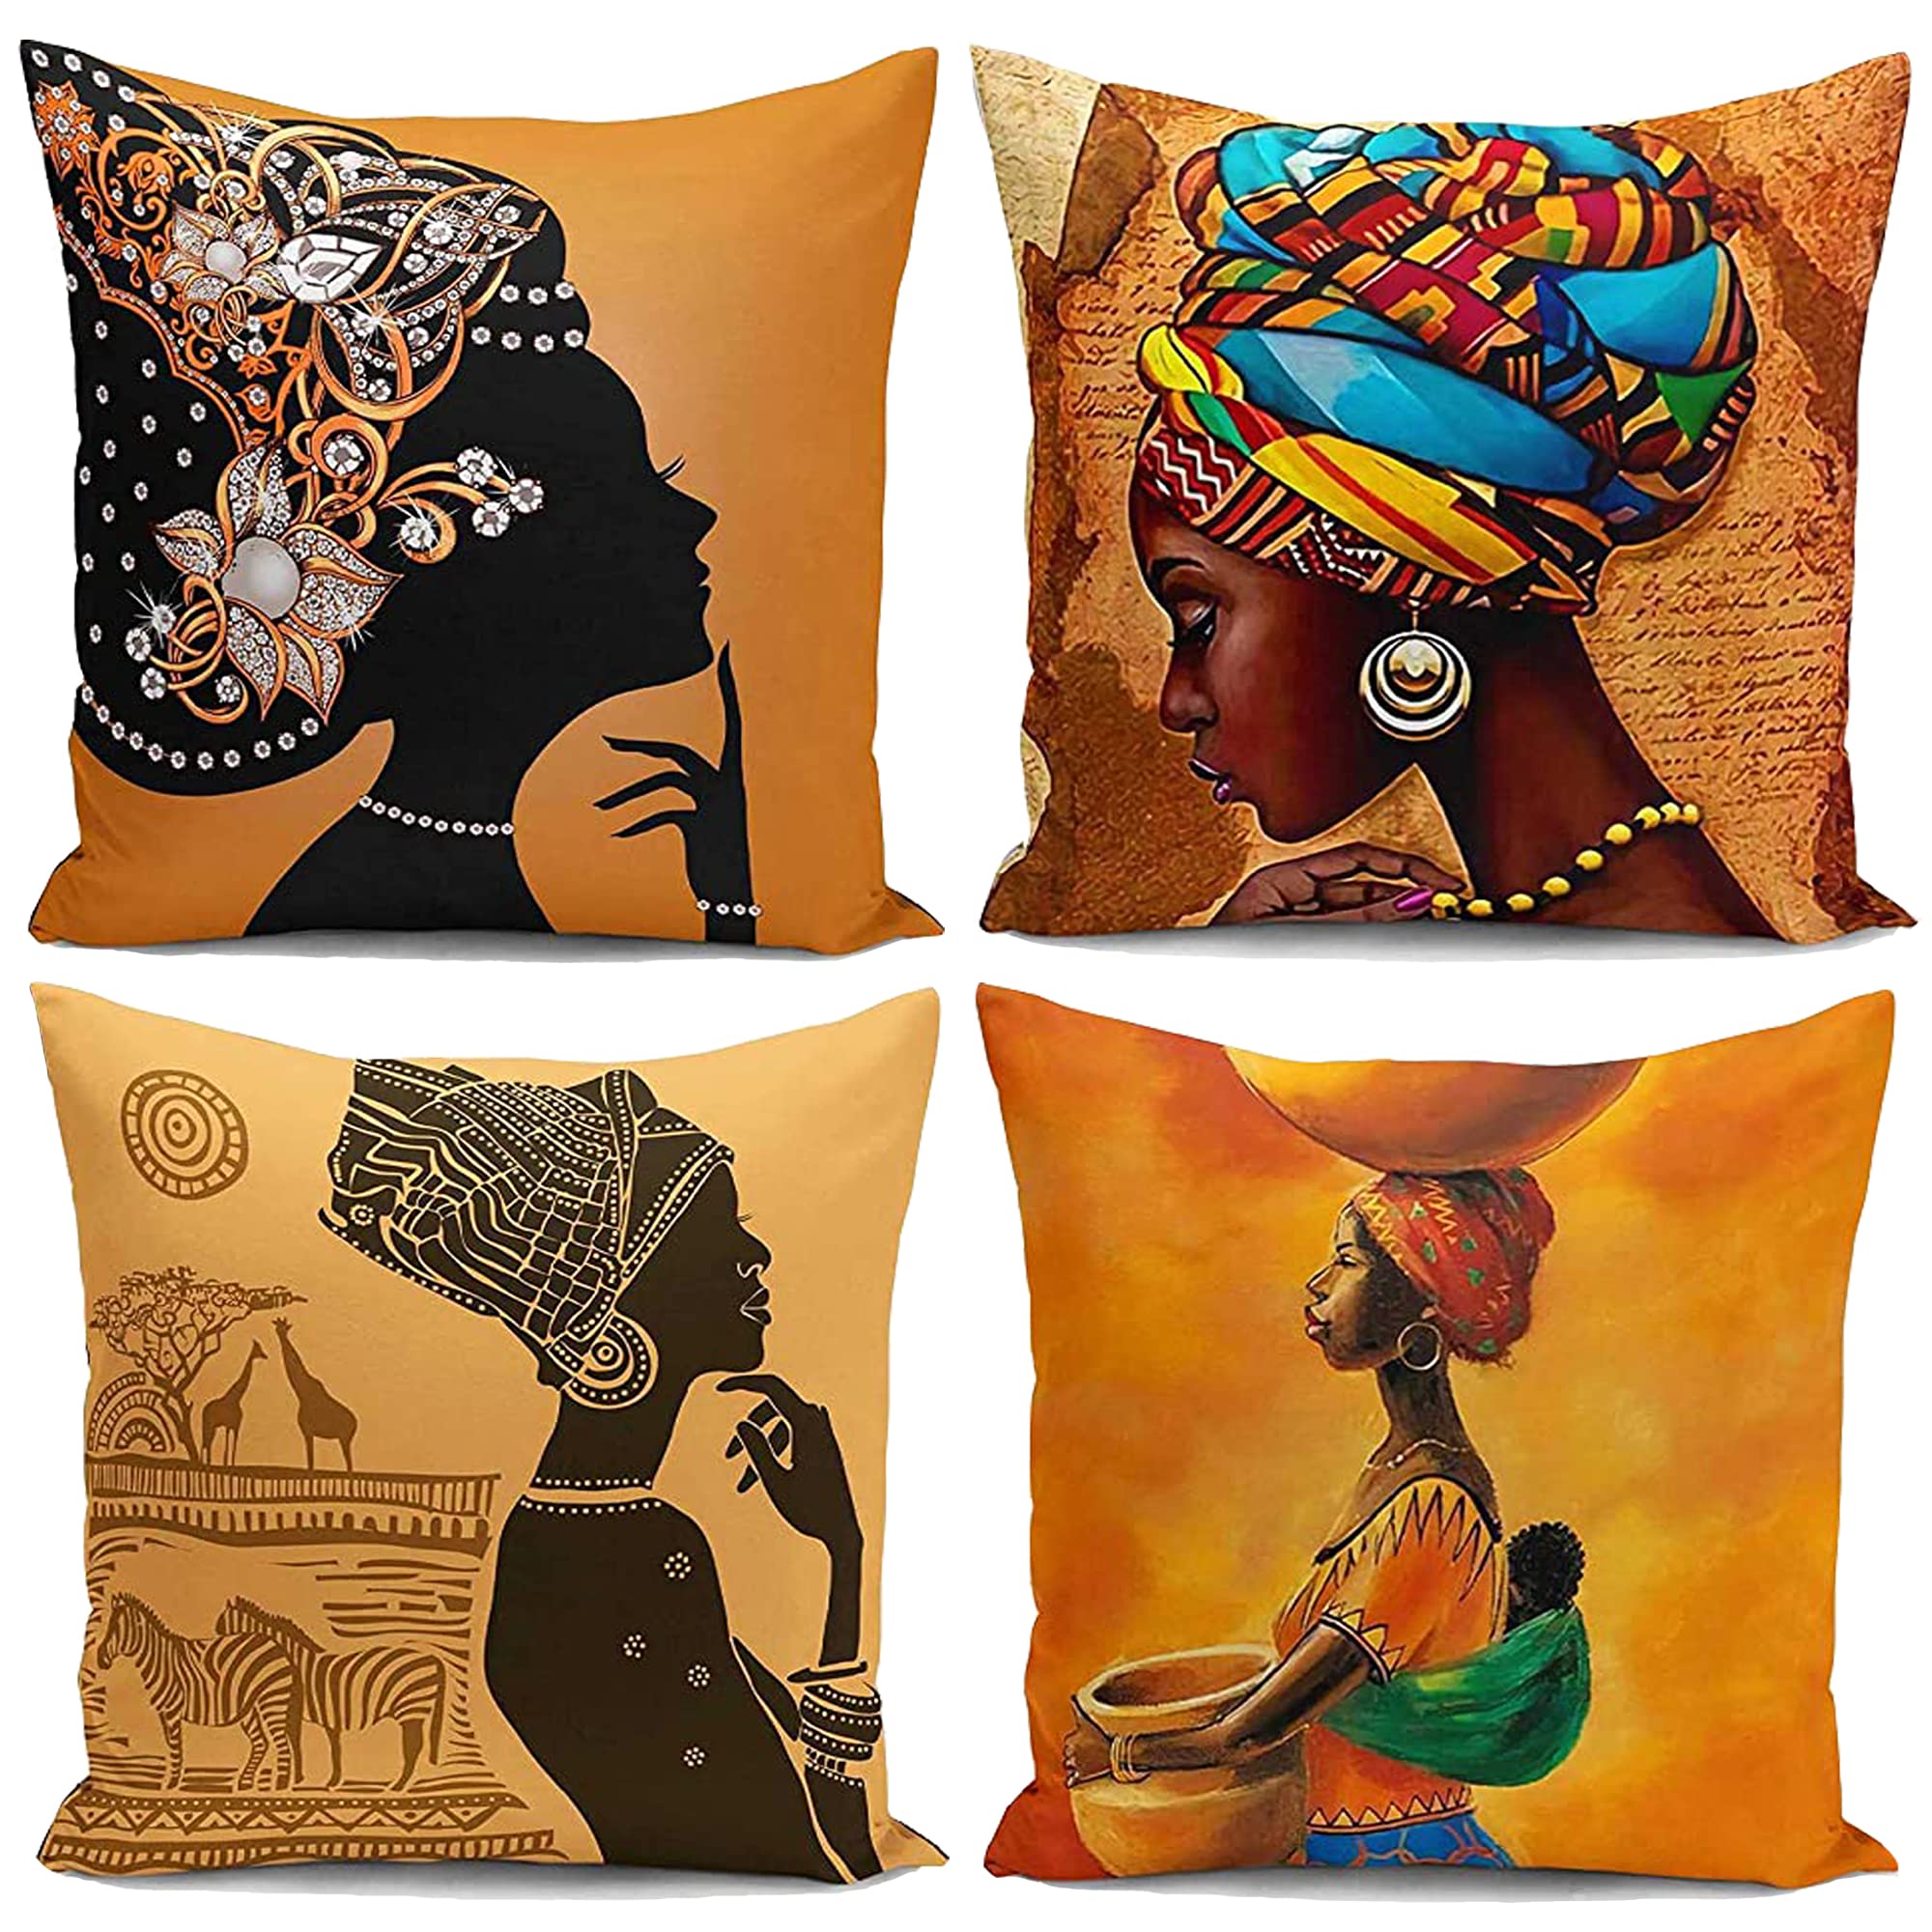 African Cushion Covers African Print Decor Ornament Throw Pillow Covers Set of 4 African Tribal Women Ethnic Art African Fabric Linen Decorations for Home Sofa Office Hotel 18x18inch (45x45cm)